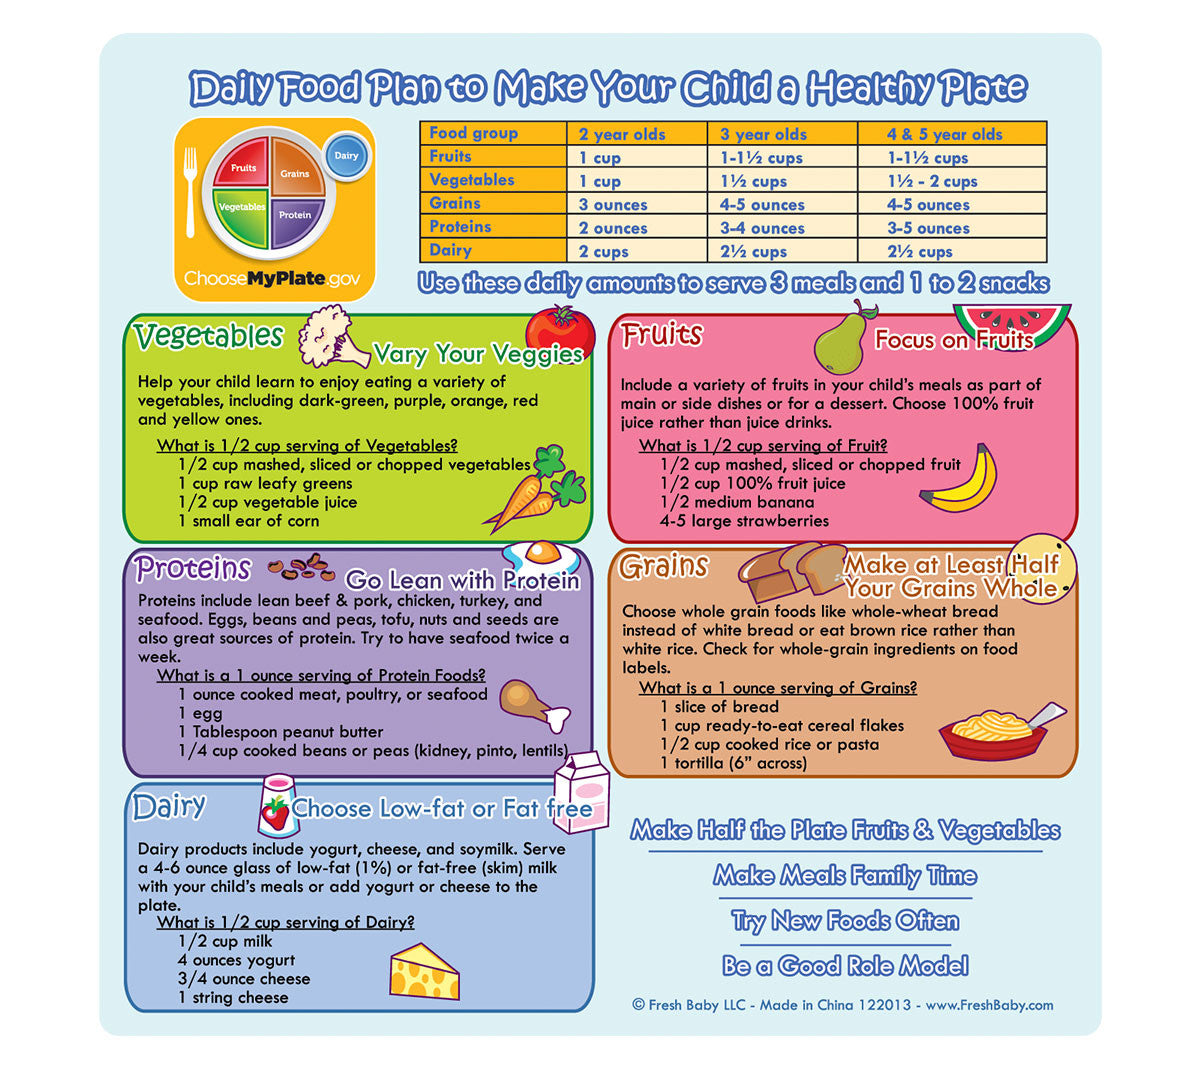 MyPlate Daily Food Plan – Fresh Baby